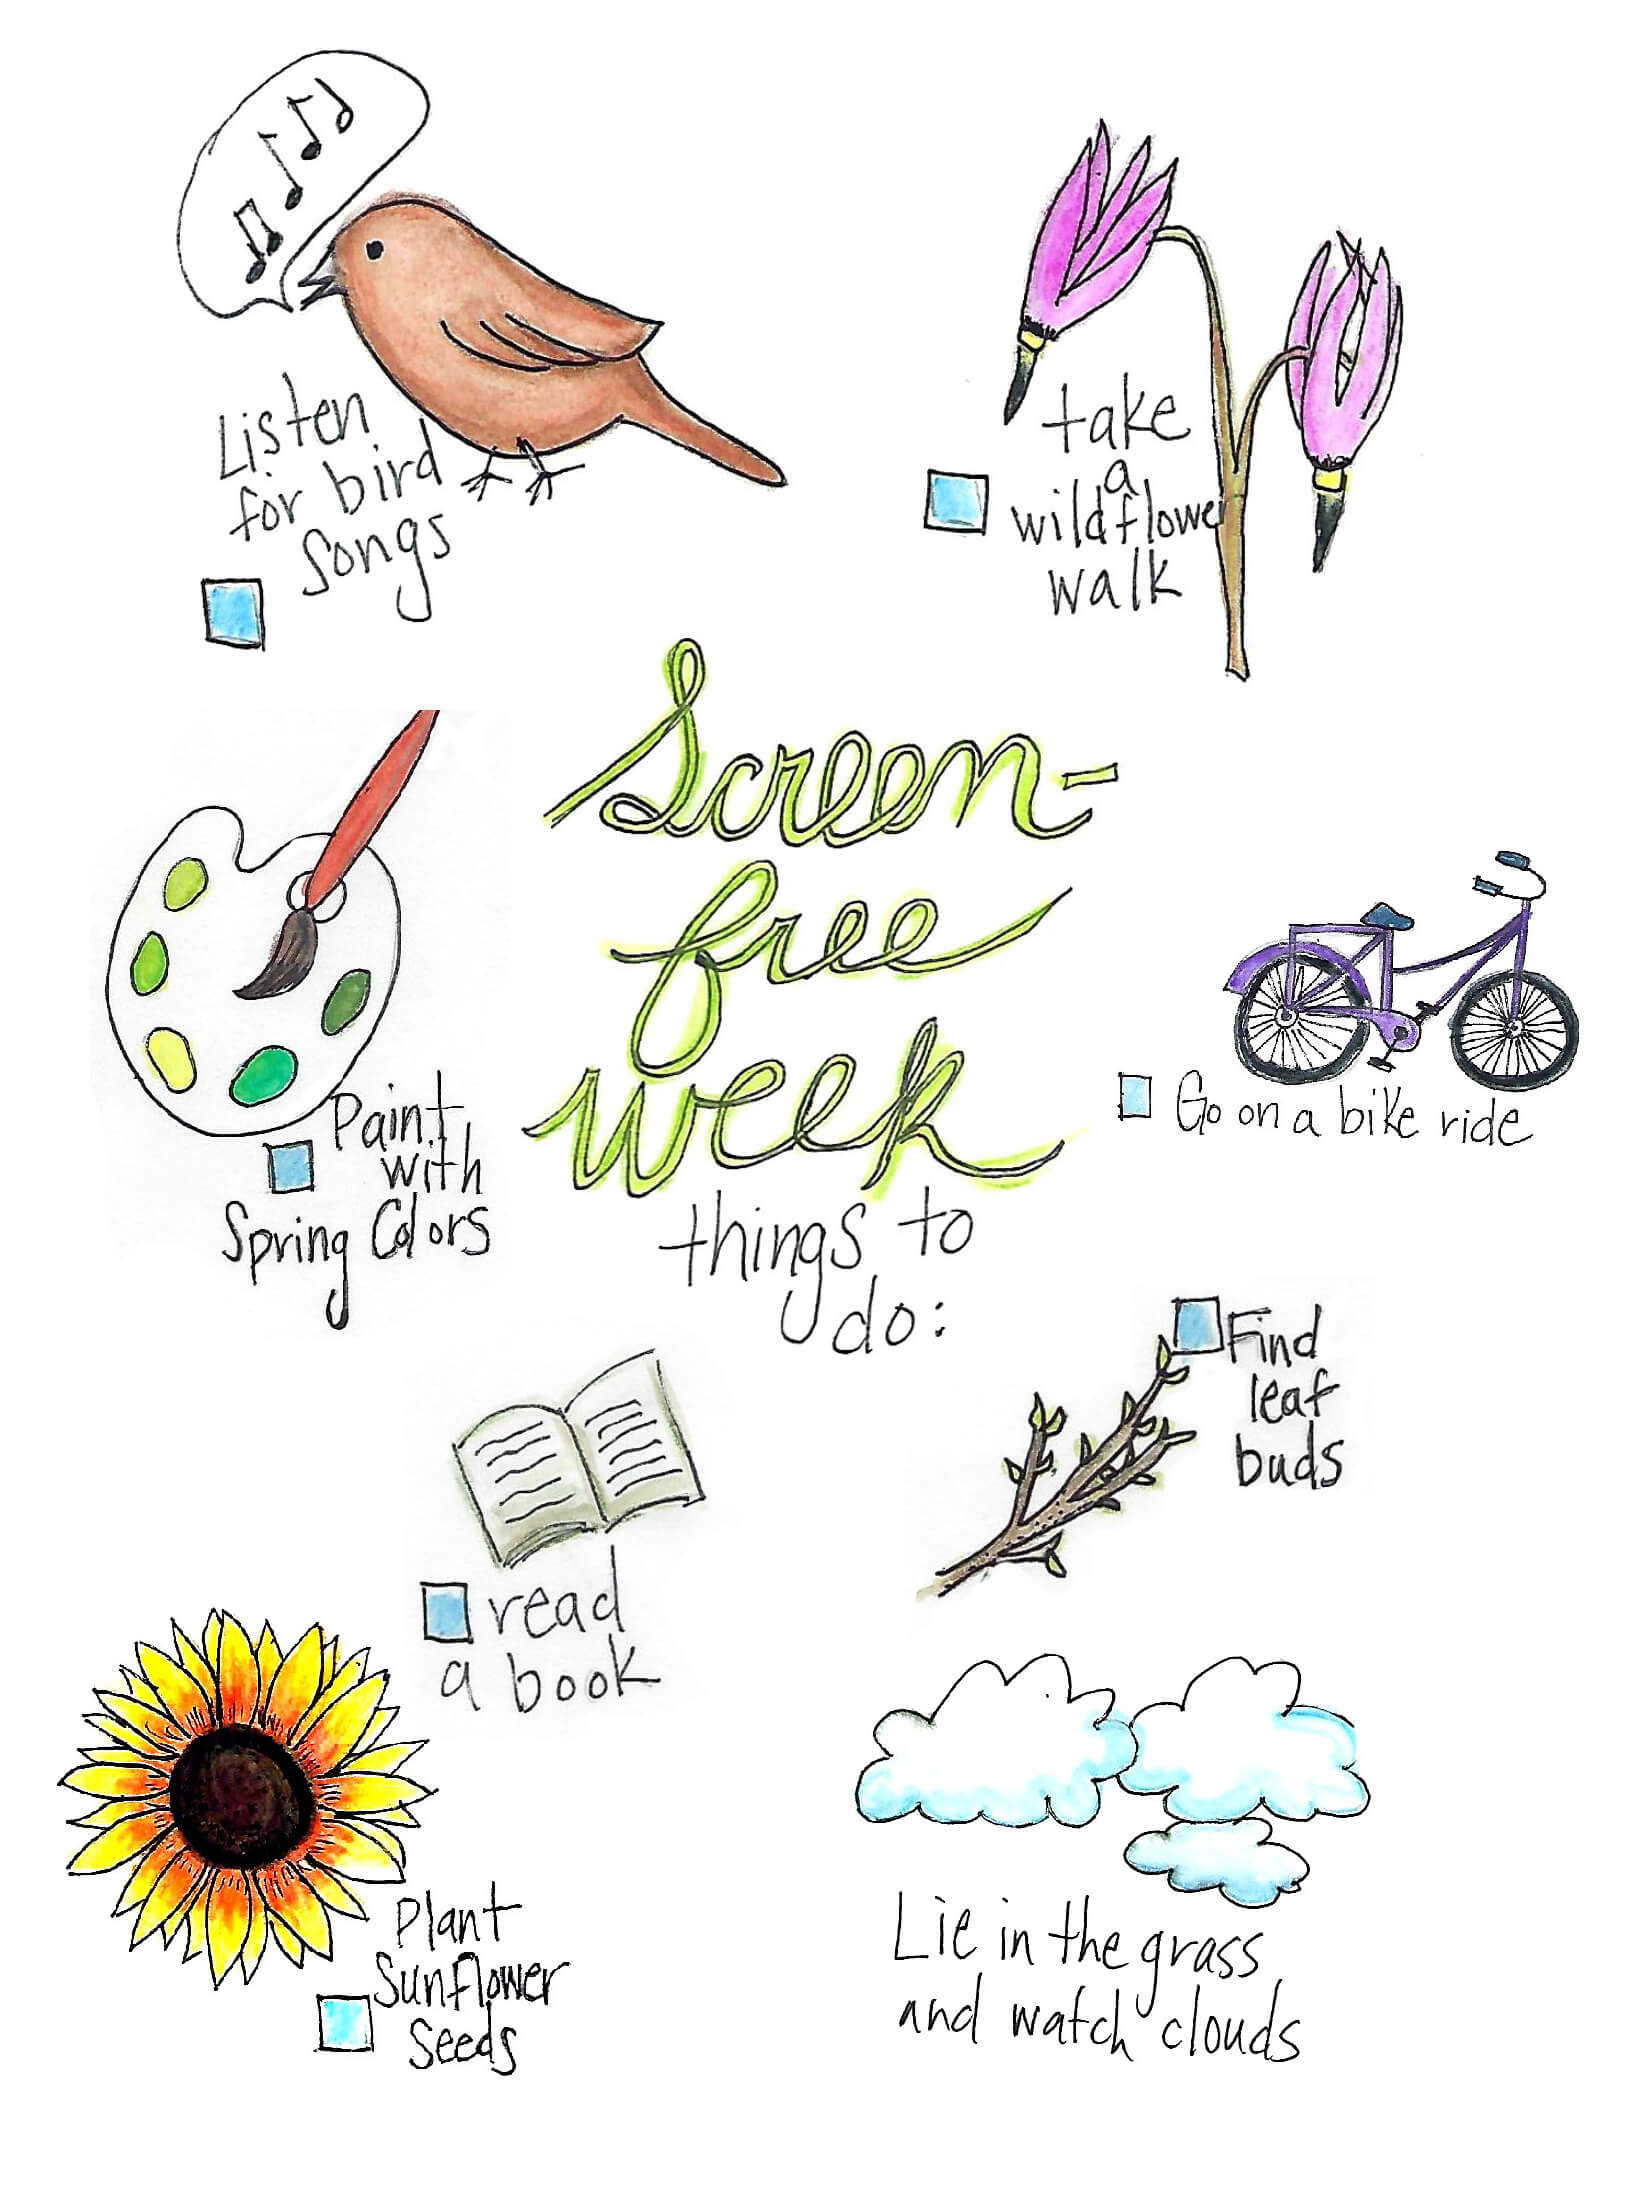 screen-free week checklist: listen to bird songs, take a wildflower walk, paint with spring colors, go on a bike ride, read a book, find leaf buds, plant sunflower seeds, lie in the grass and watch clouds